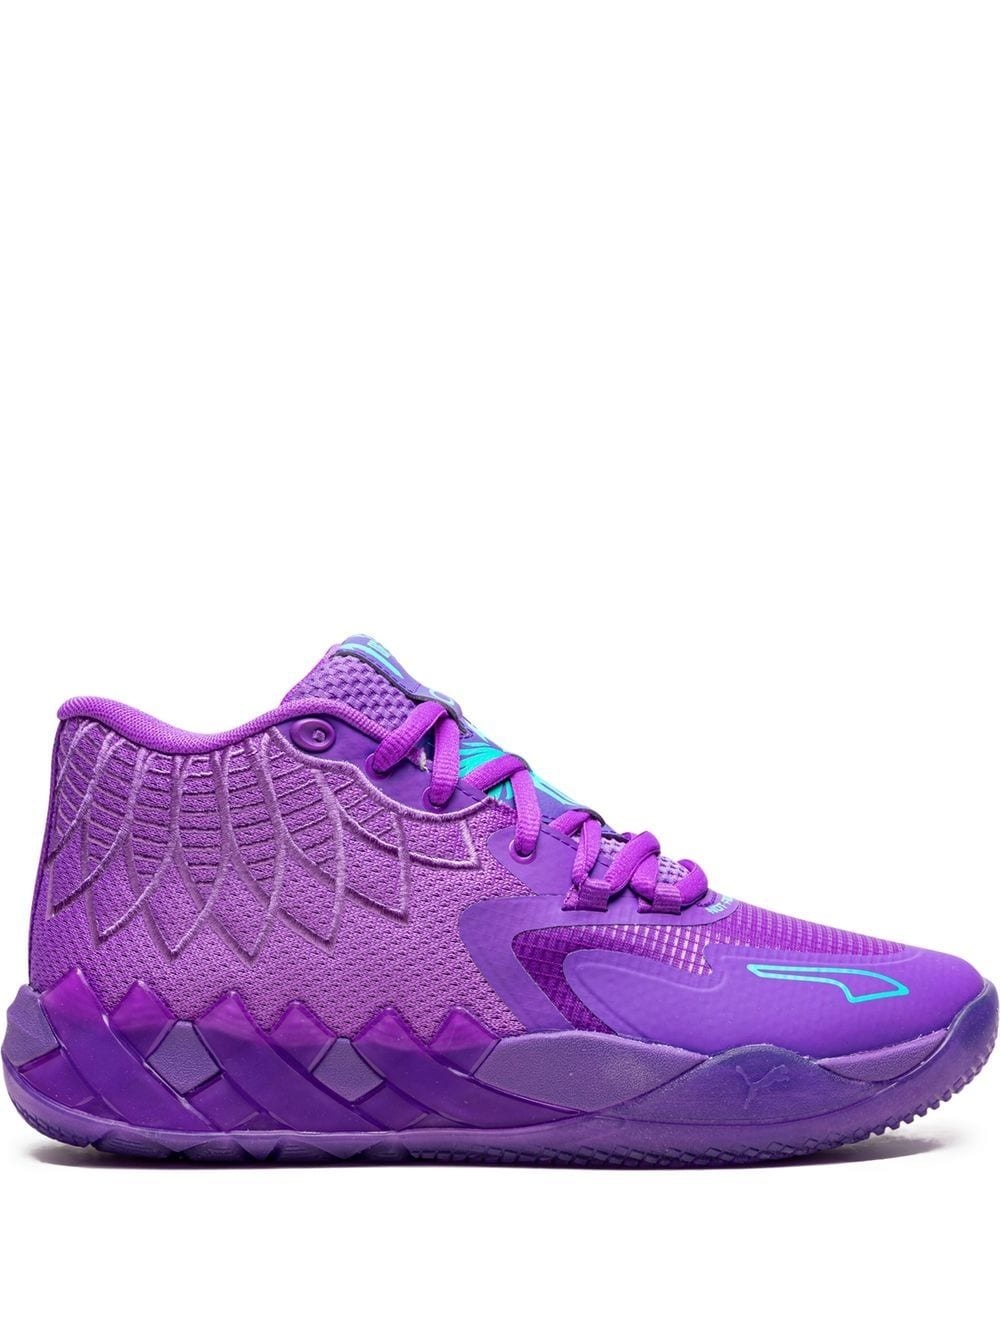 MB1 "Lamelo Ball Queen City" sneakers - 1